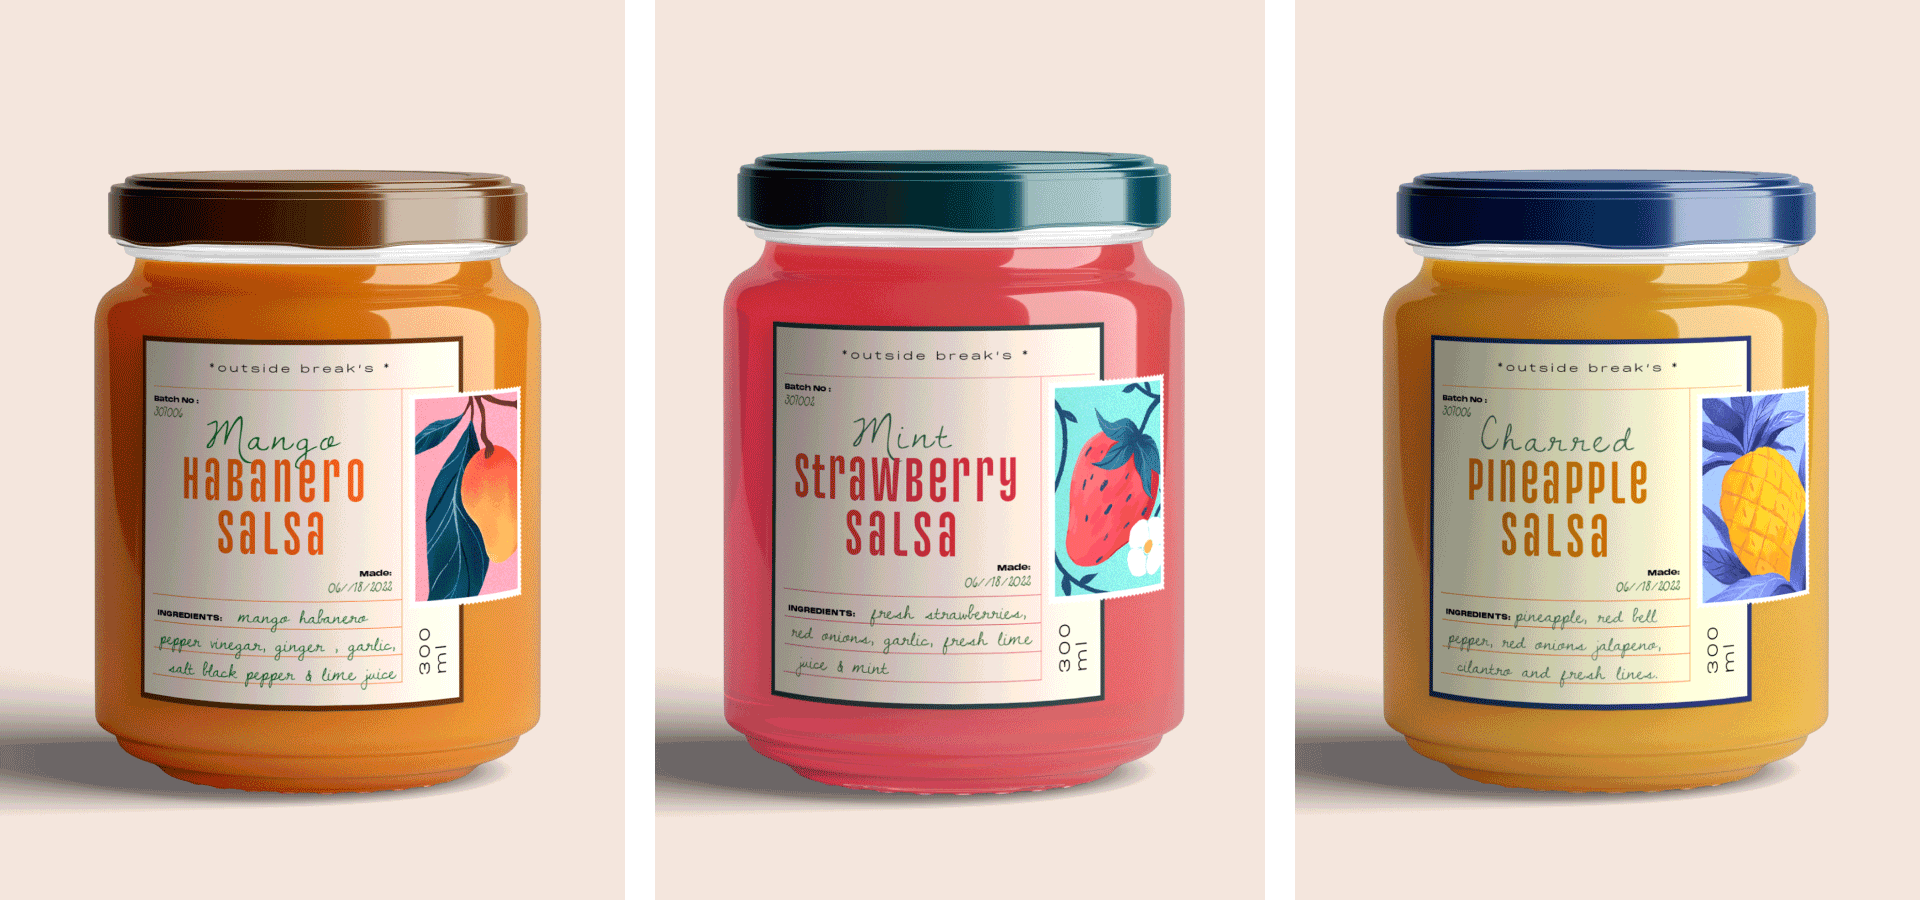 Three images of jars of taco sauces on brightly coloured backgrounds.